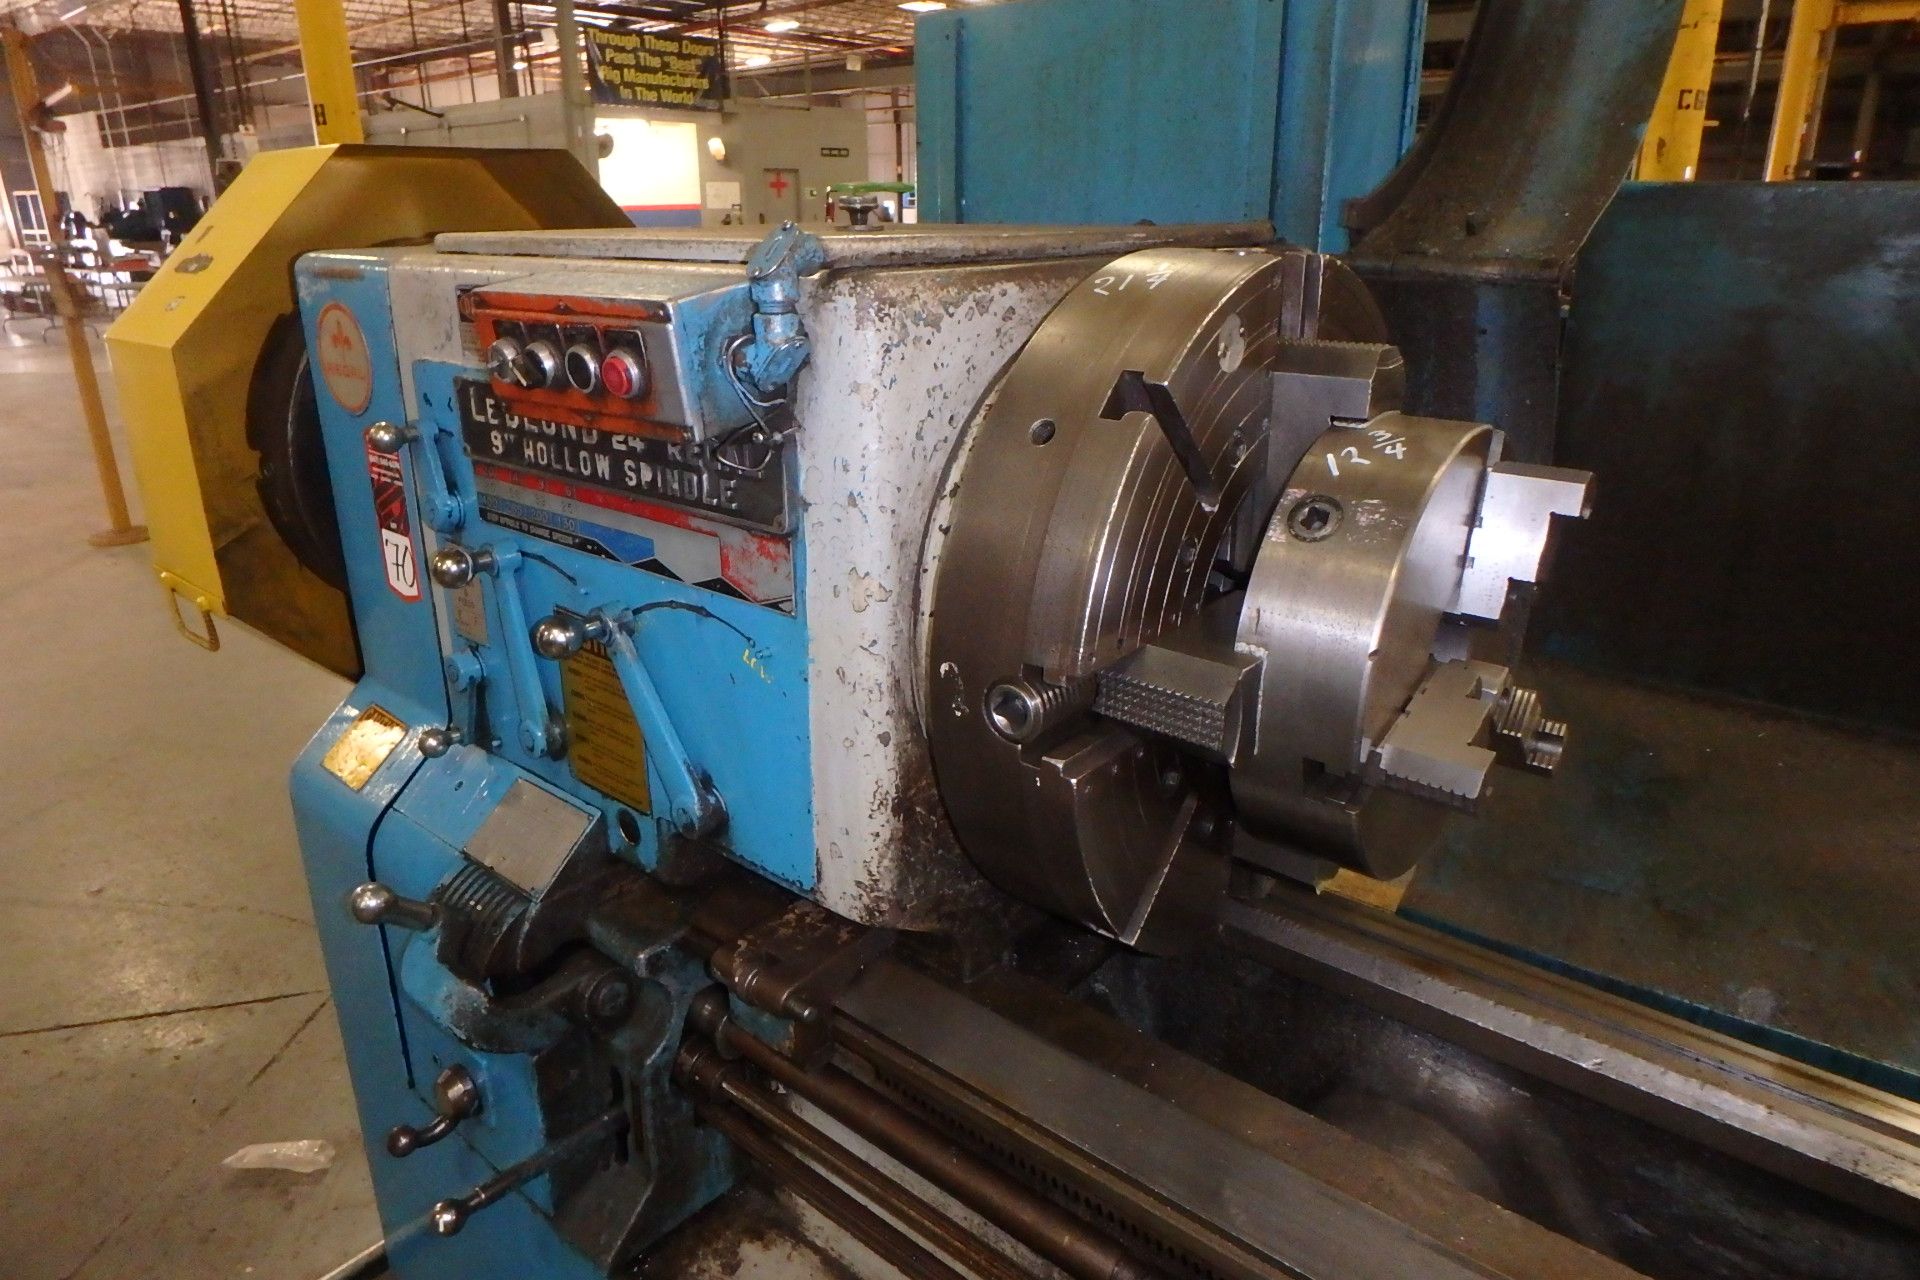 LEBLOND REGAL 24" x 120" Hollow Spindle Lathe, s/n 6HS458, w/ 9" Spindle Hole, 21" Front & Rear - Image 3 of 4